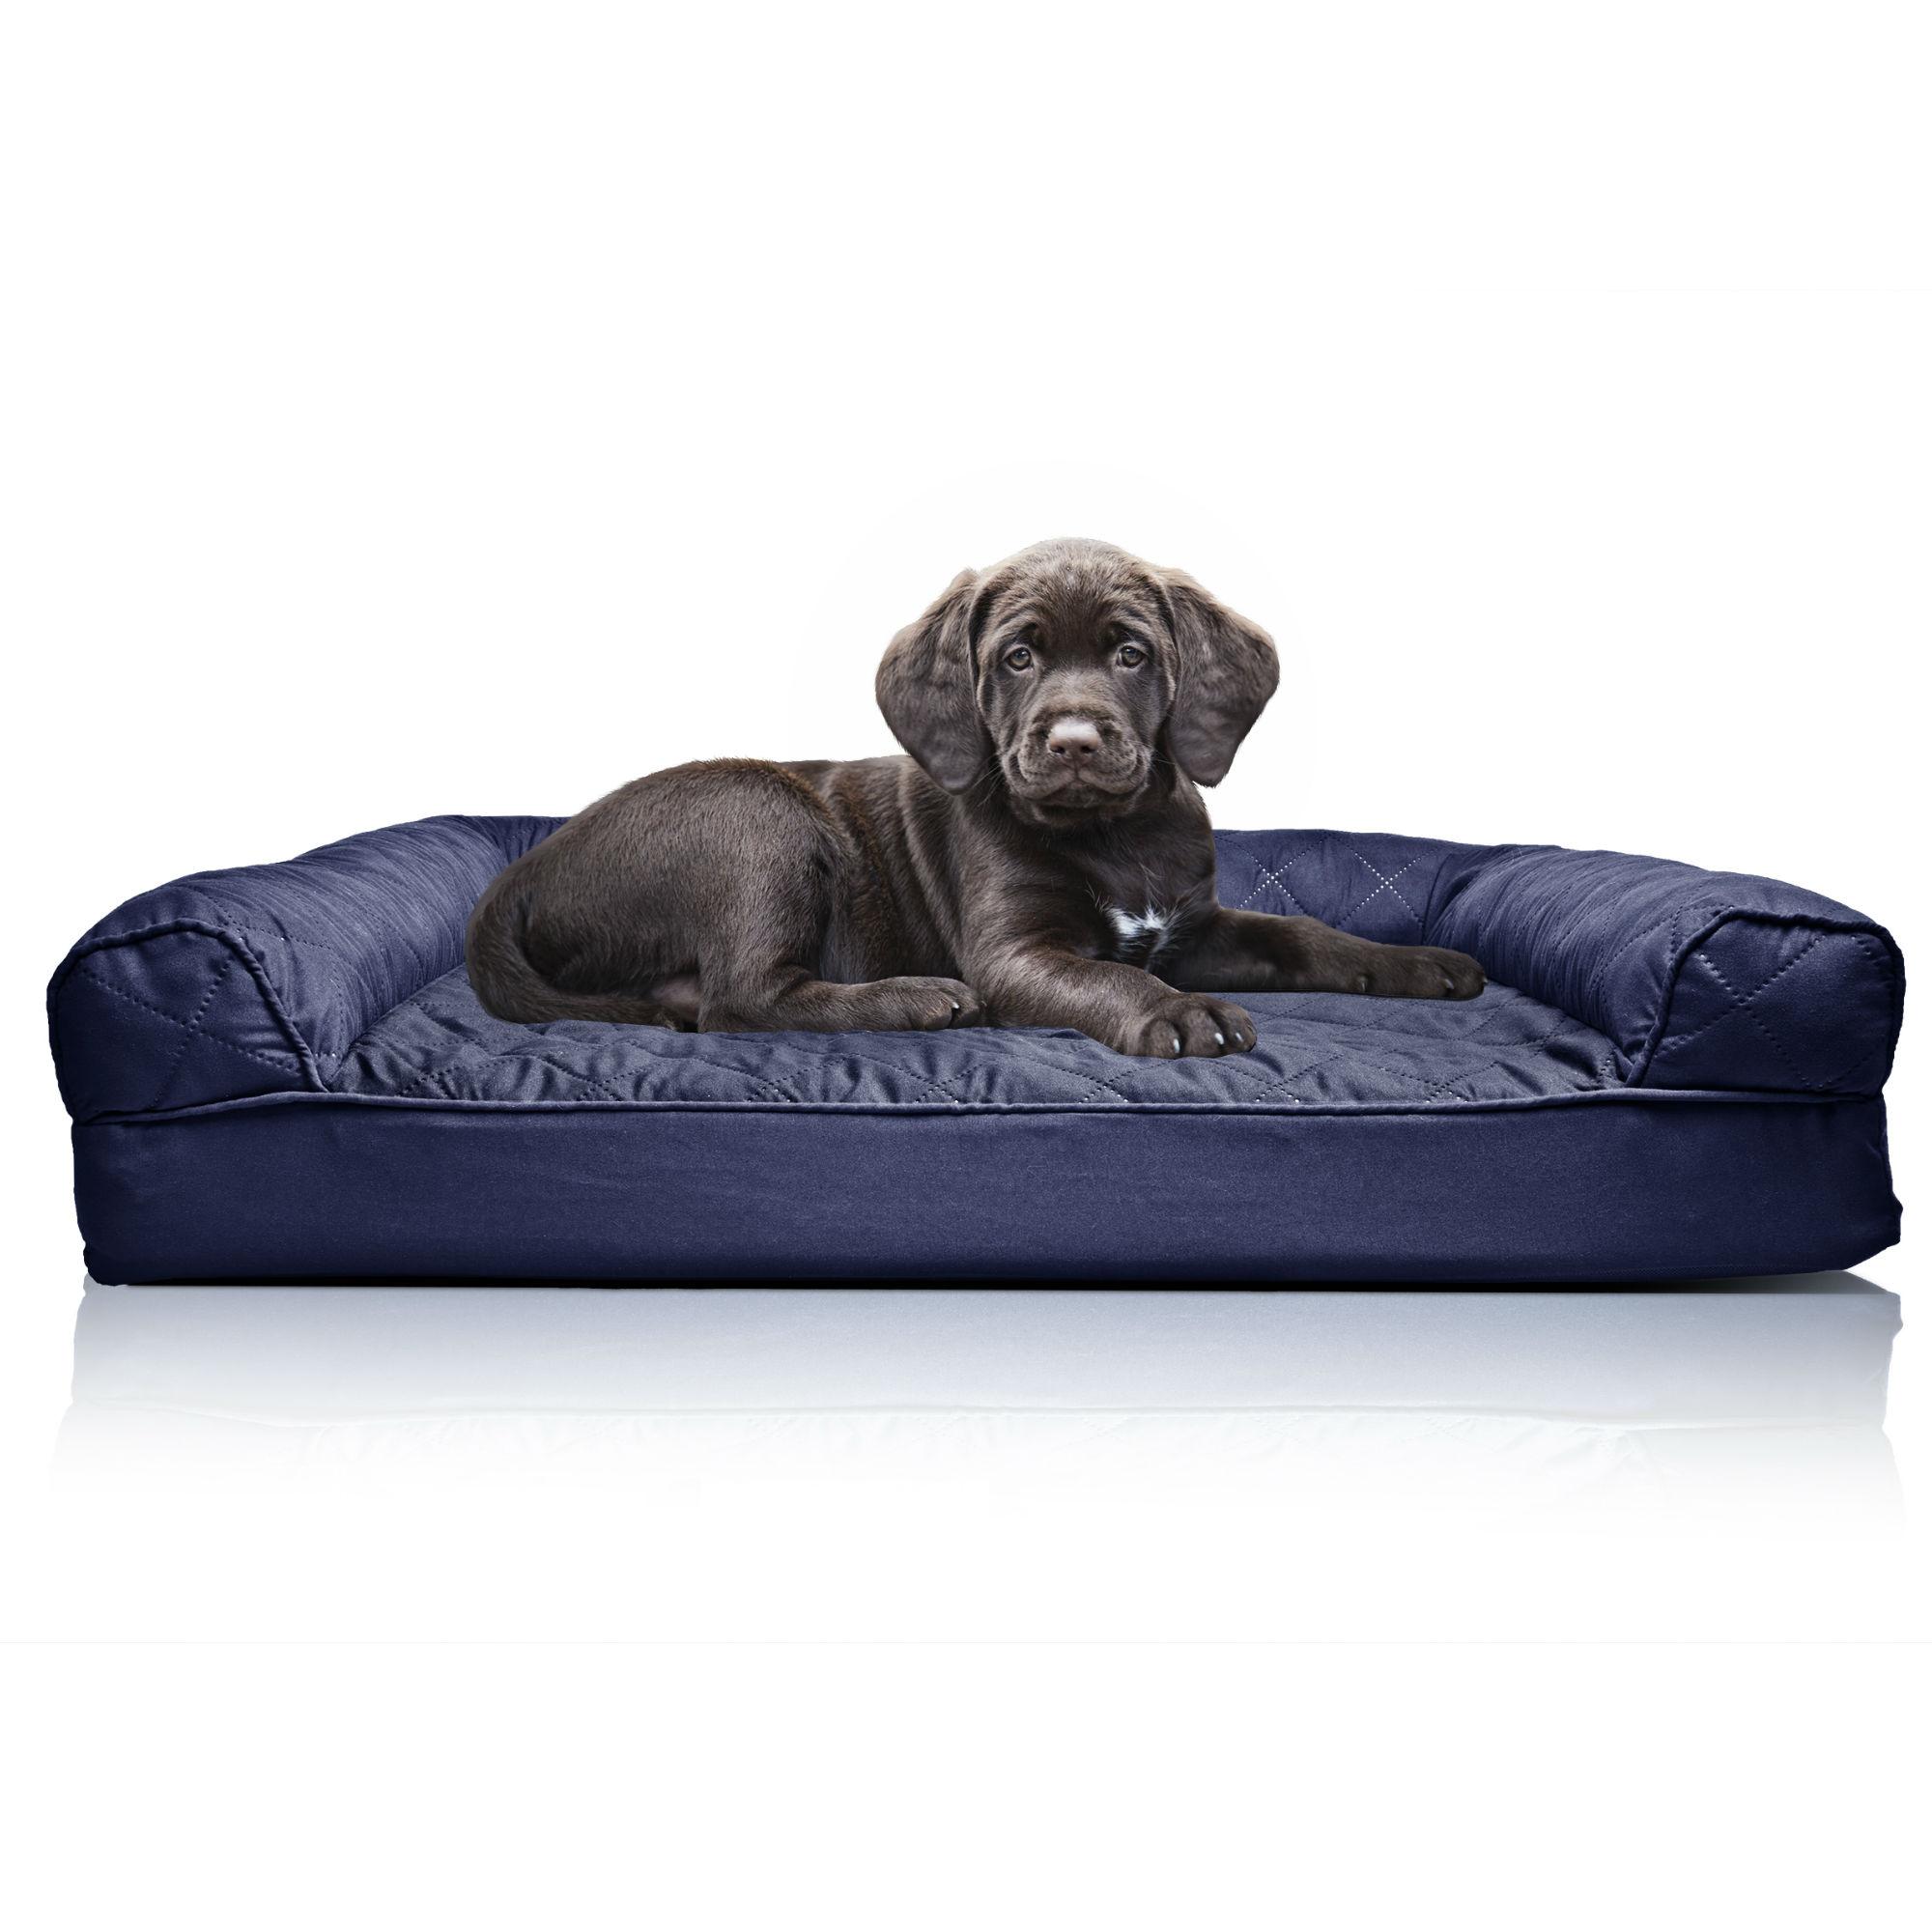 Furhaven Quilted Orthopedic Sofa Pet Bed - Navy